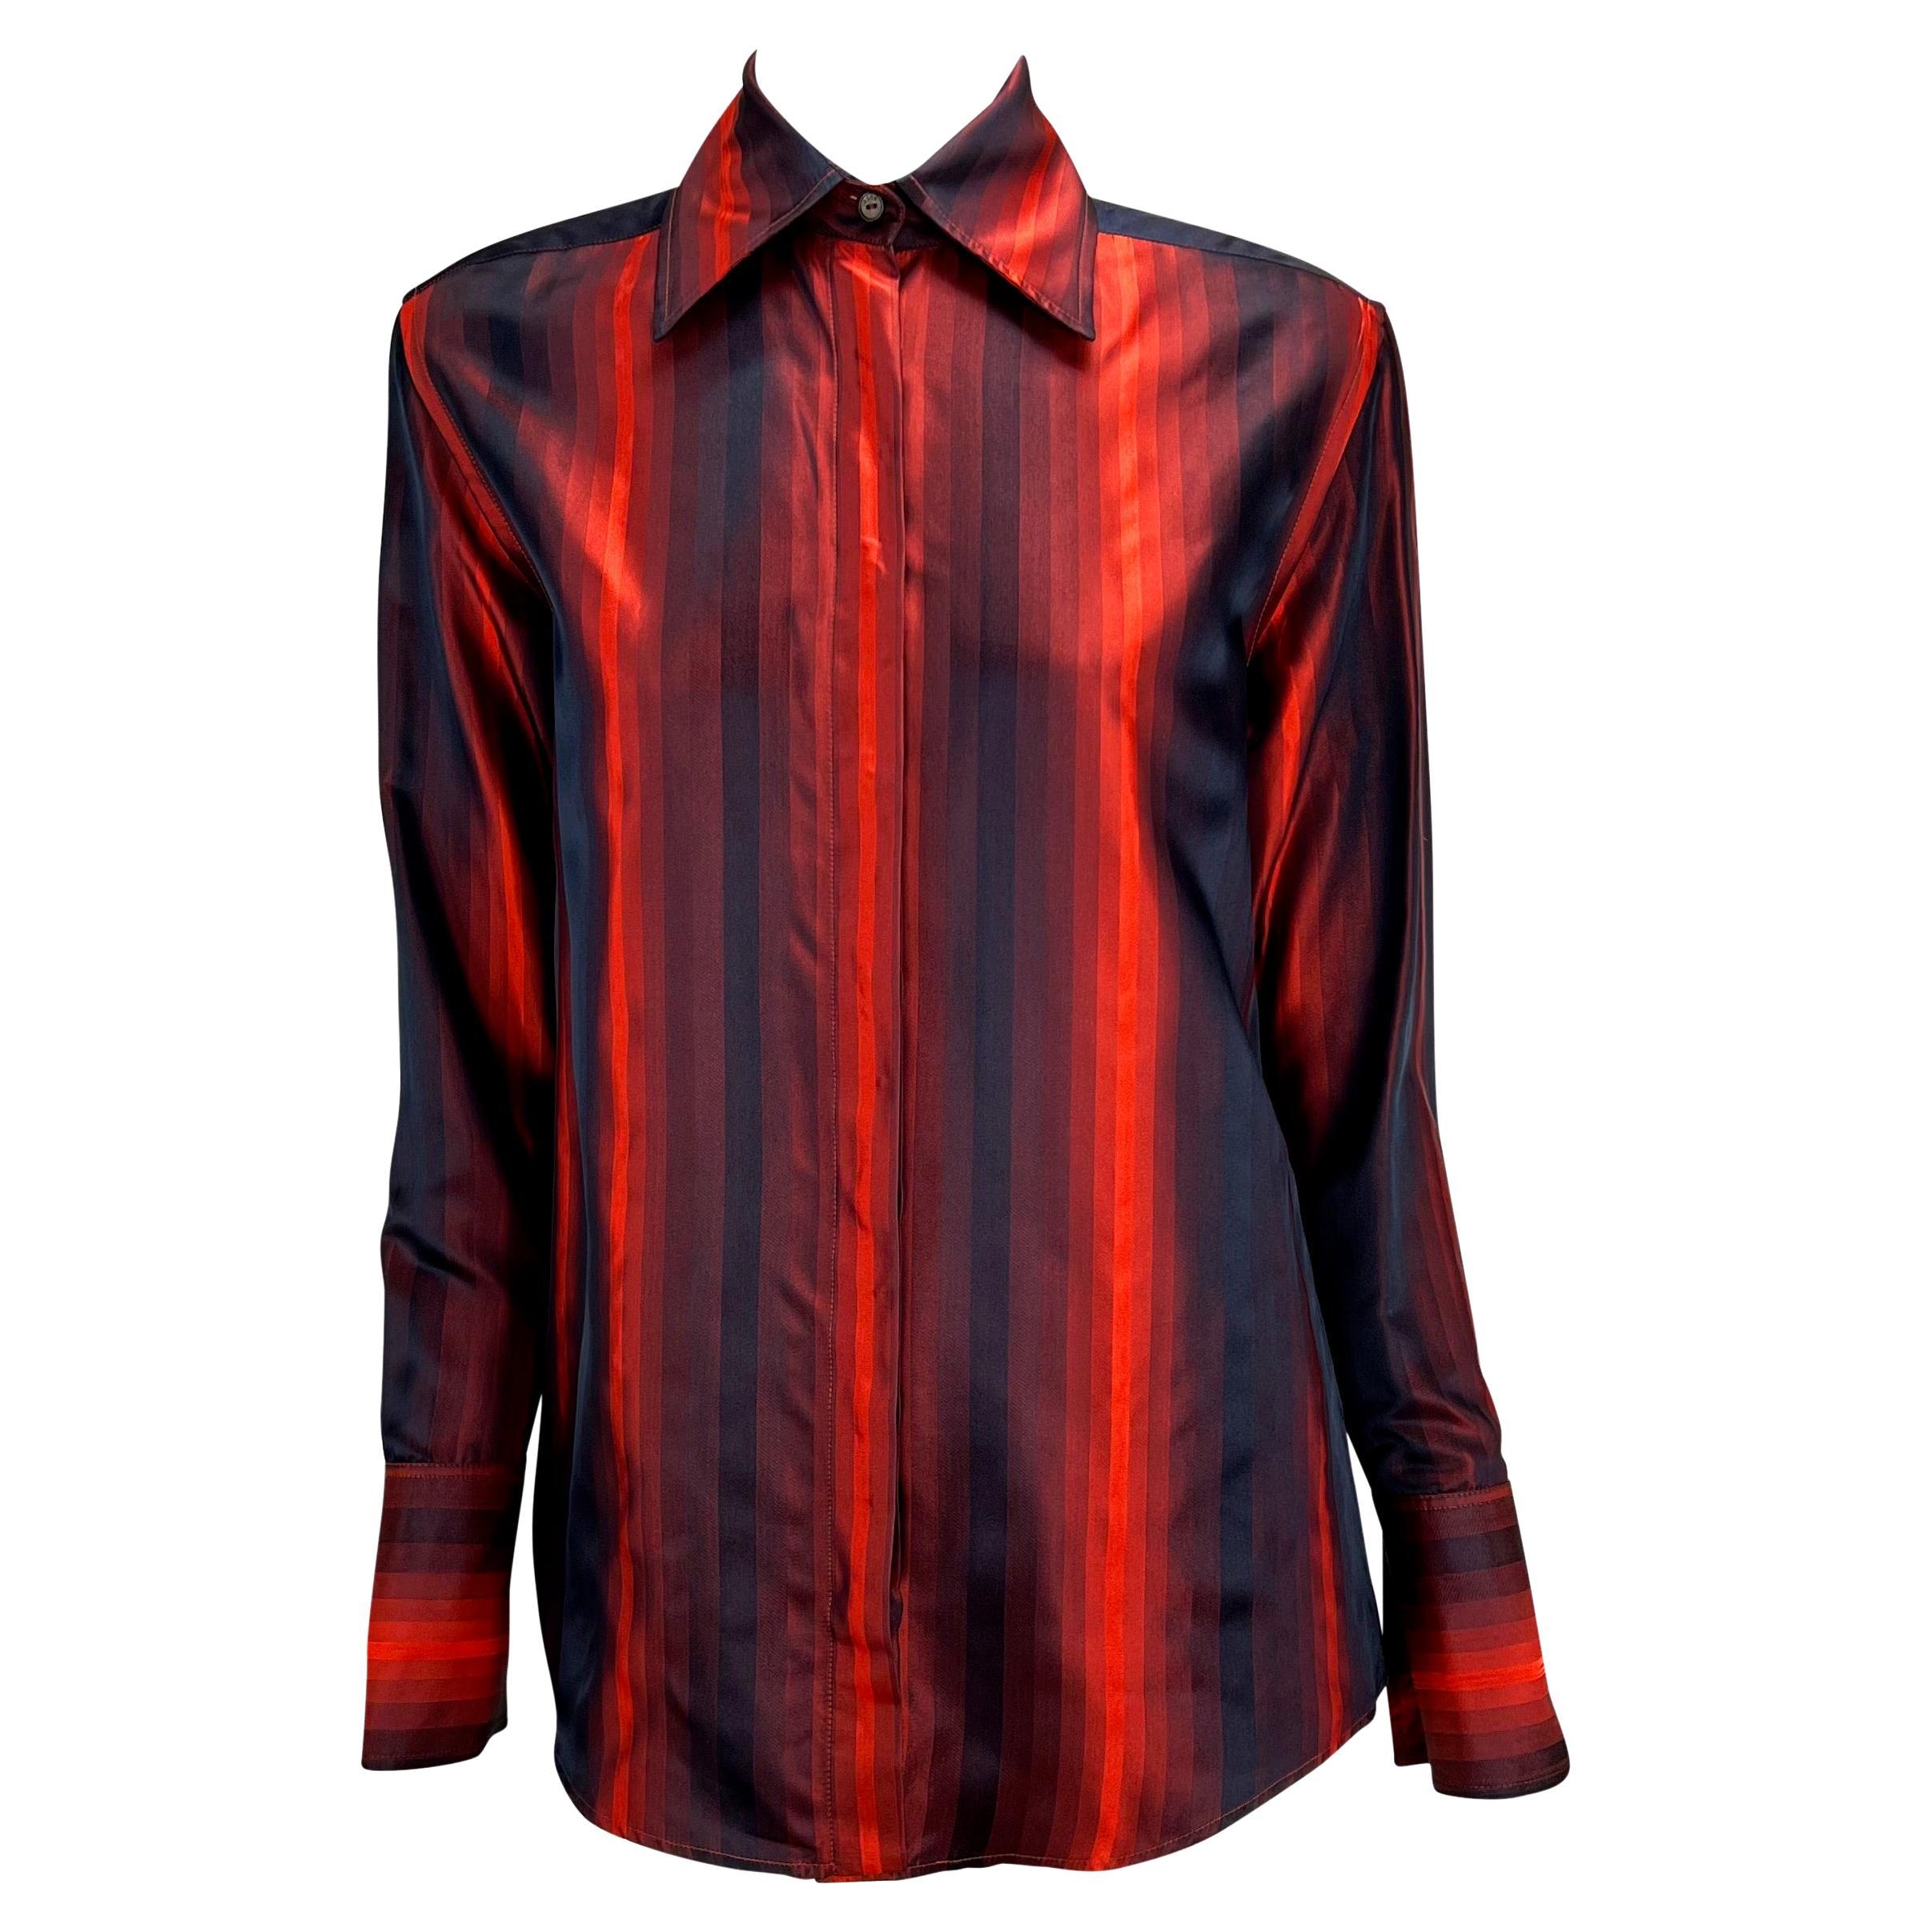 F/W 1997 Gucci by Tom Ford Runway Red Ombré Stripe Button Up Shoulder Pad Top